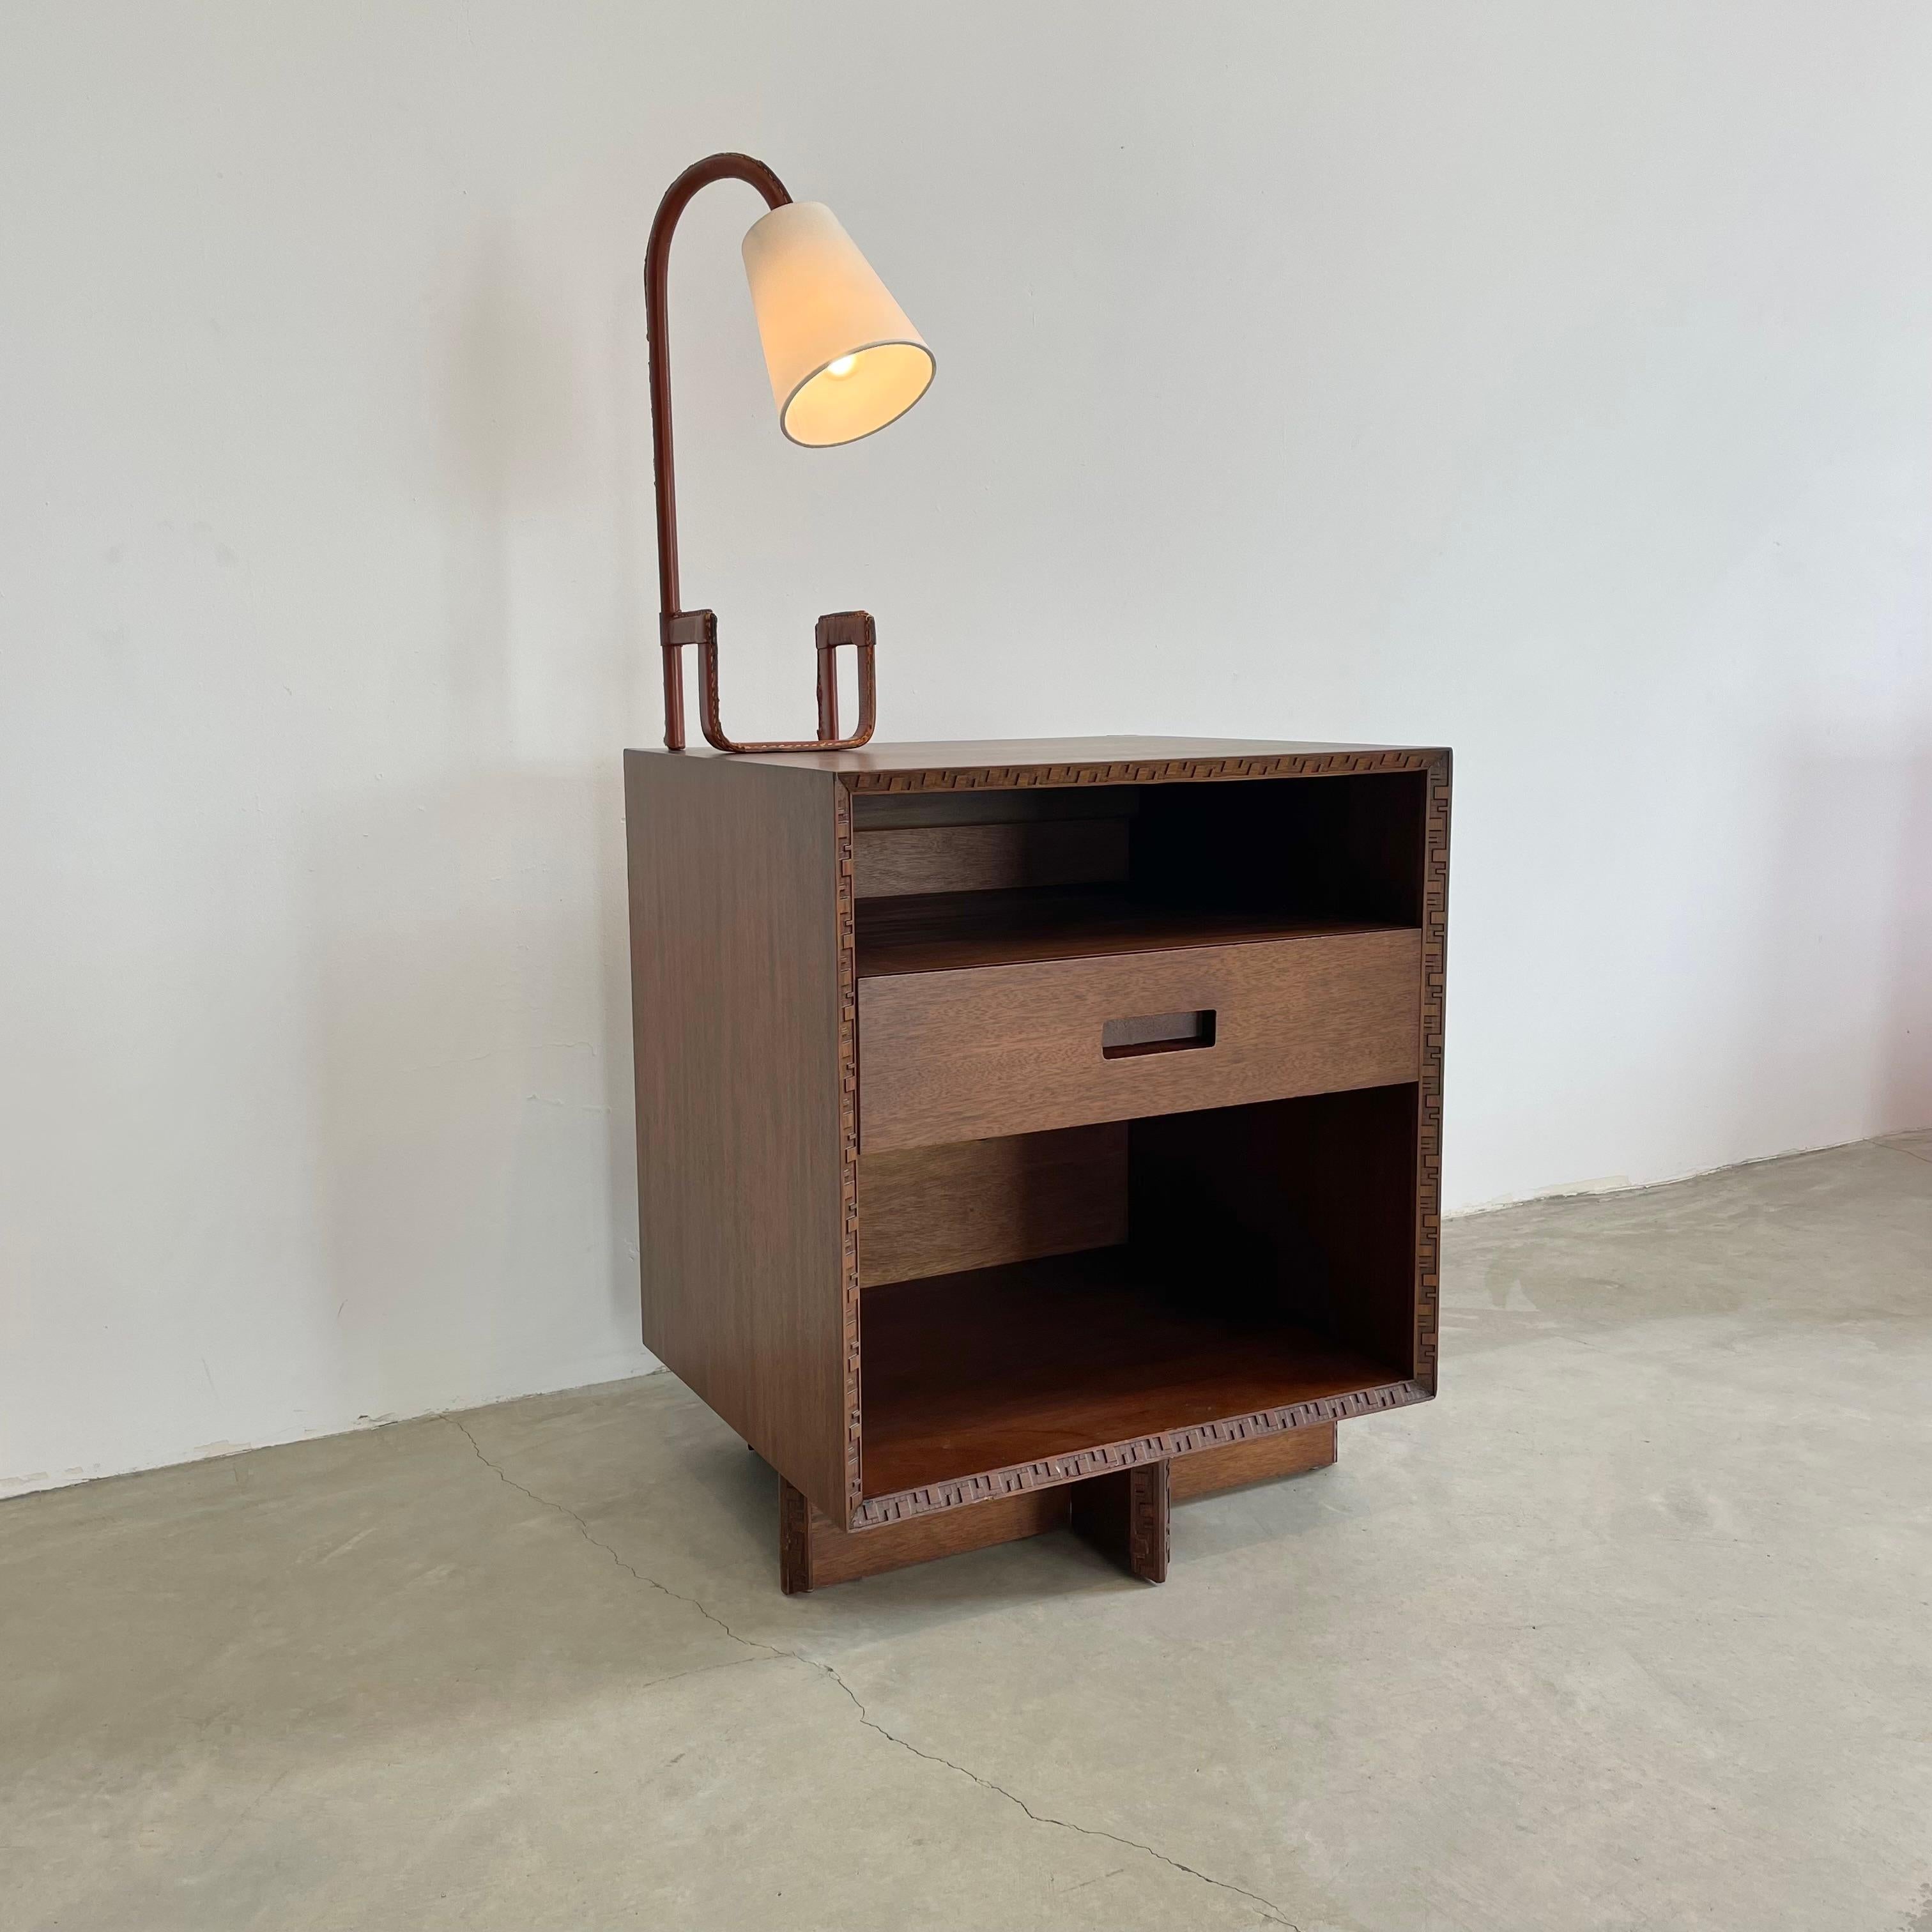 A rare and exceptional refinished Honduran Mahogany 'Taliesin' platform nightstand (or side table / end table) was designed by Frank Lloyd Wright for Heritage-Henredon in 1955 and produced only for two years, therefore is now a highly sought-after